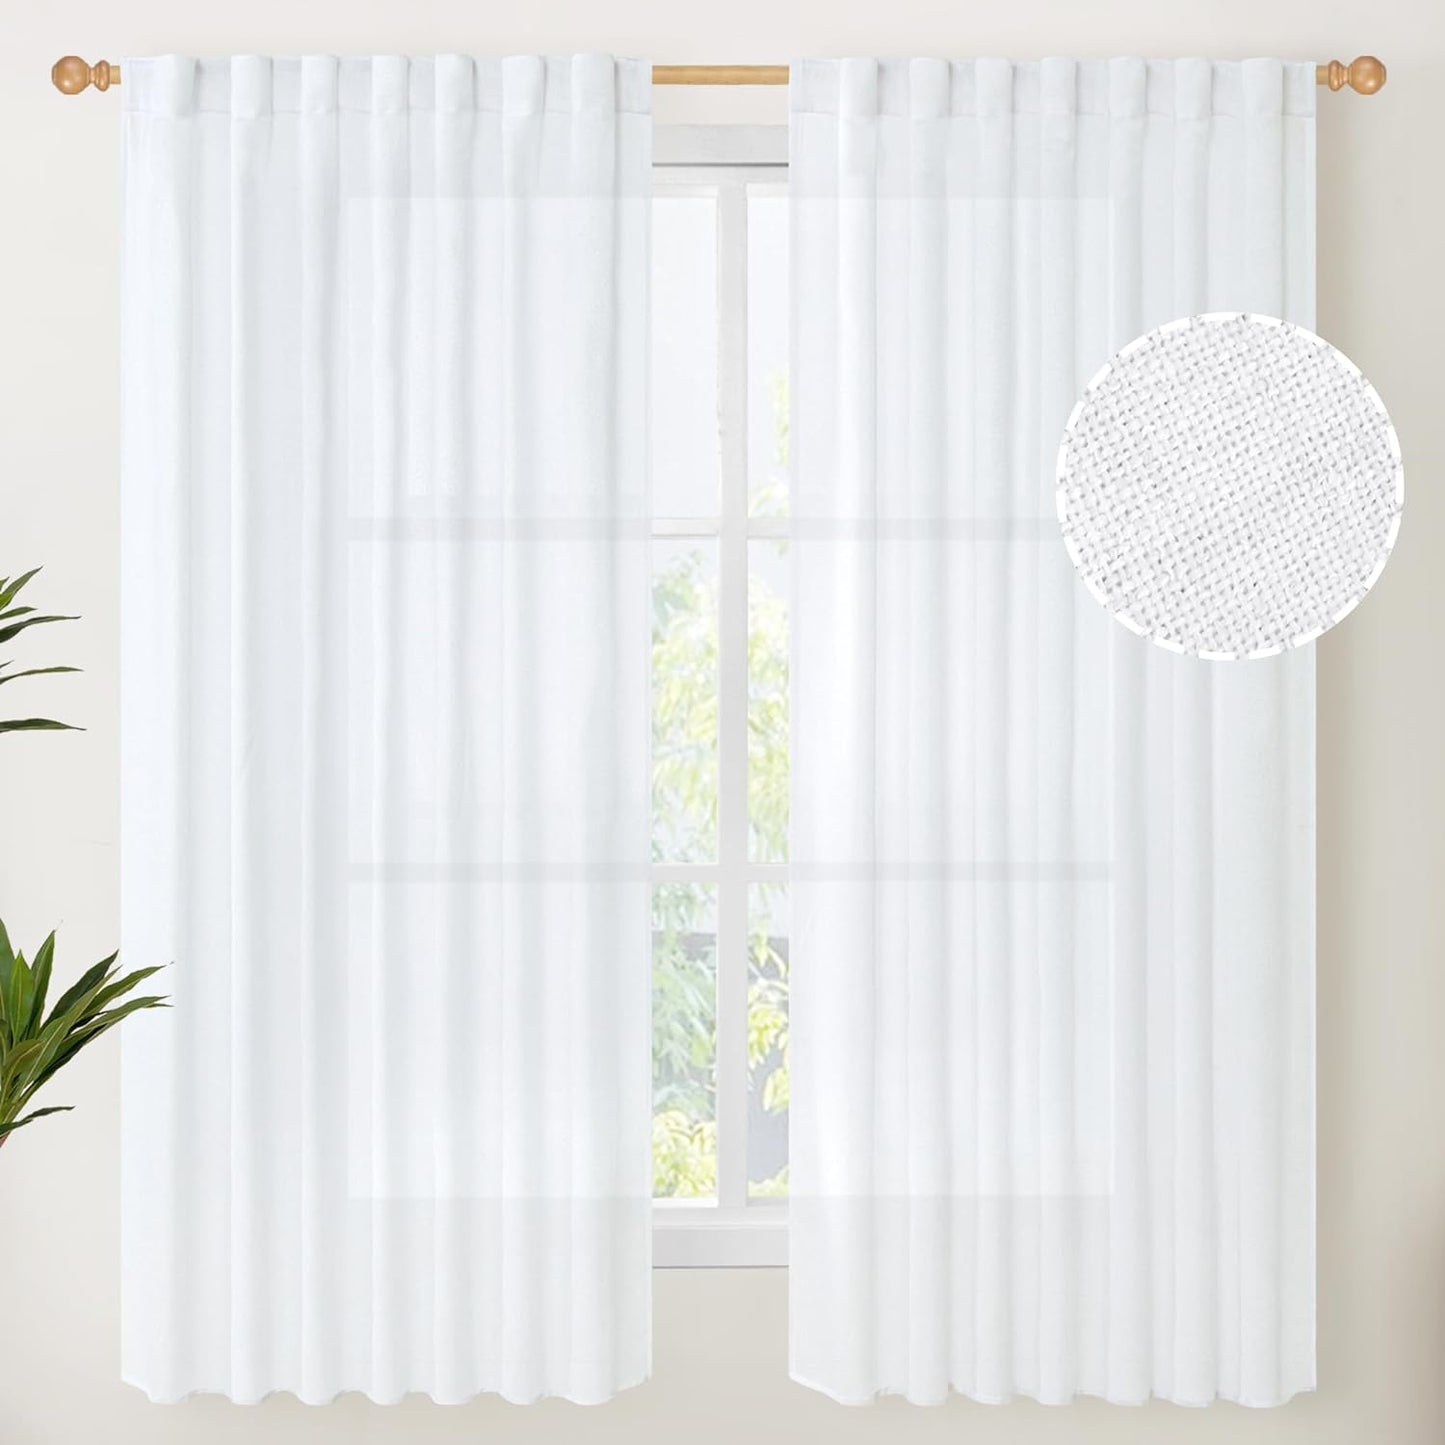 Youngstex Natural Linen Curtains 72 Inch Length 2 Panels for Living Room Light Filtering Textured Window Drapes for Bedroom Dining Office Back Tab Rod Pocket, 52 X 72 Inch  YoungsTex White 60W X 63L 